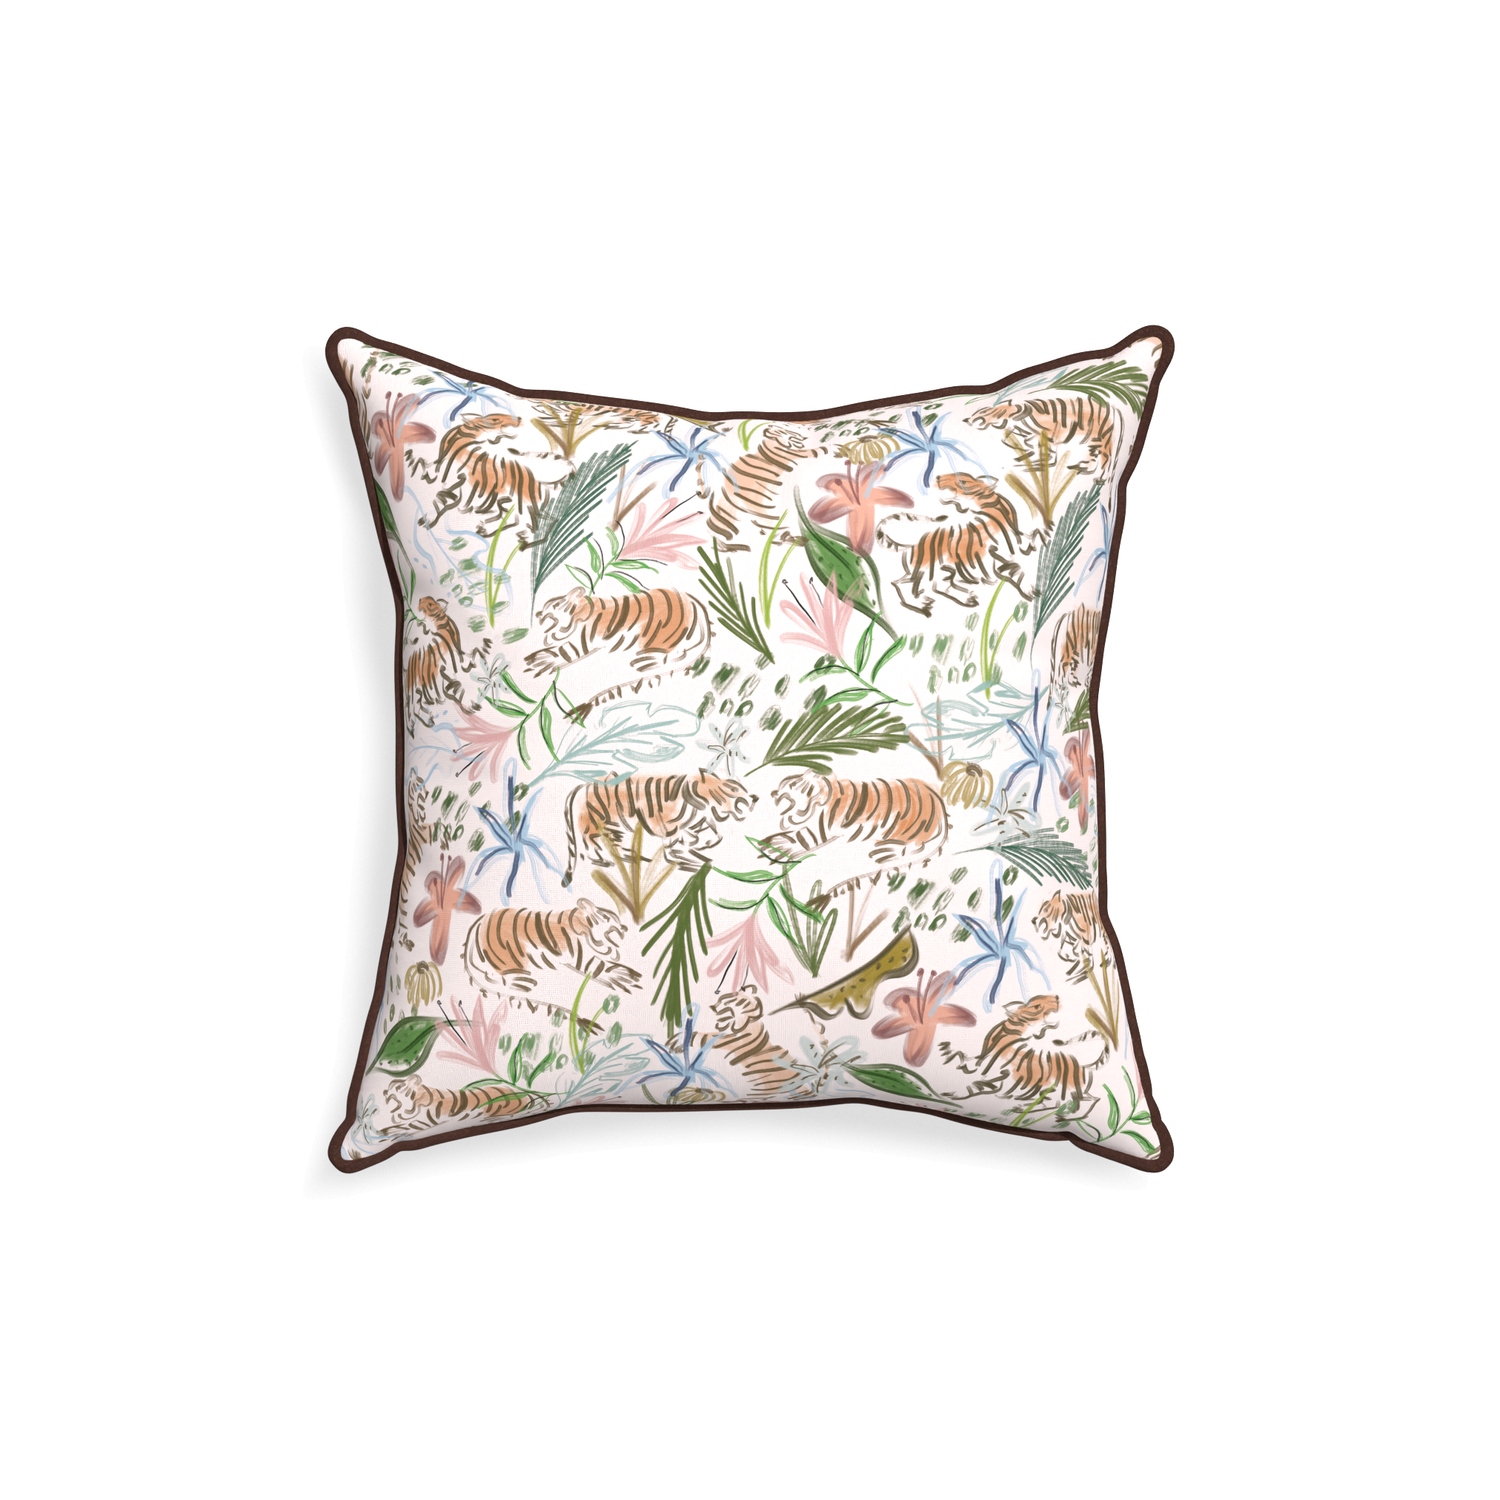 18-square frida pink custom pink chinoiserie tigerpillow with w piping on white background